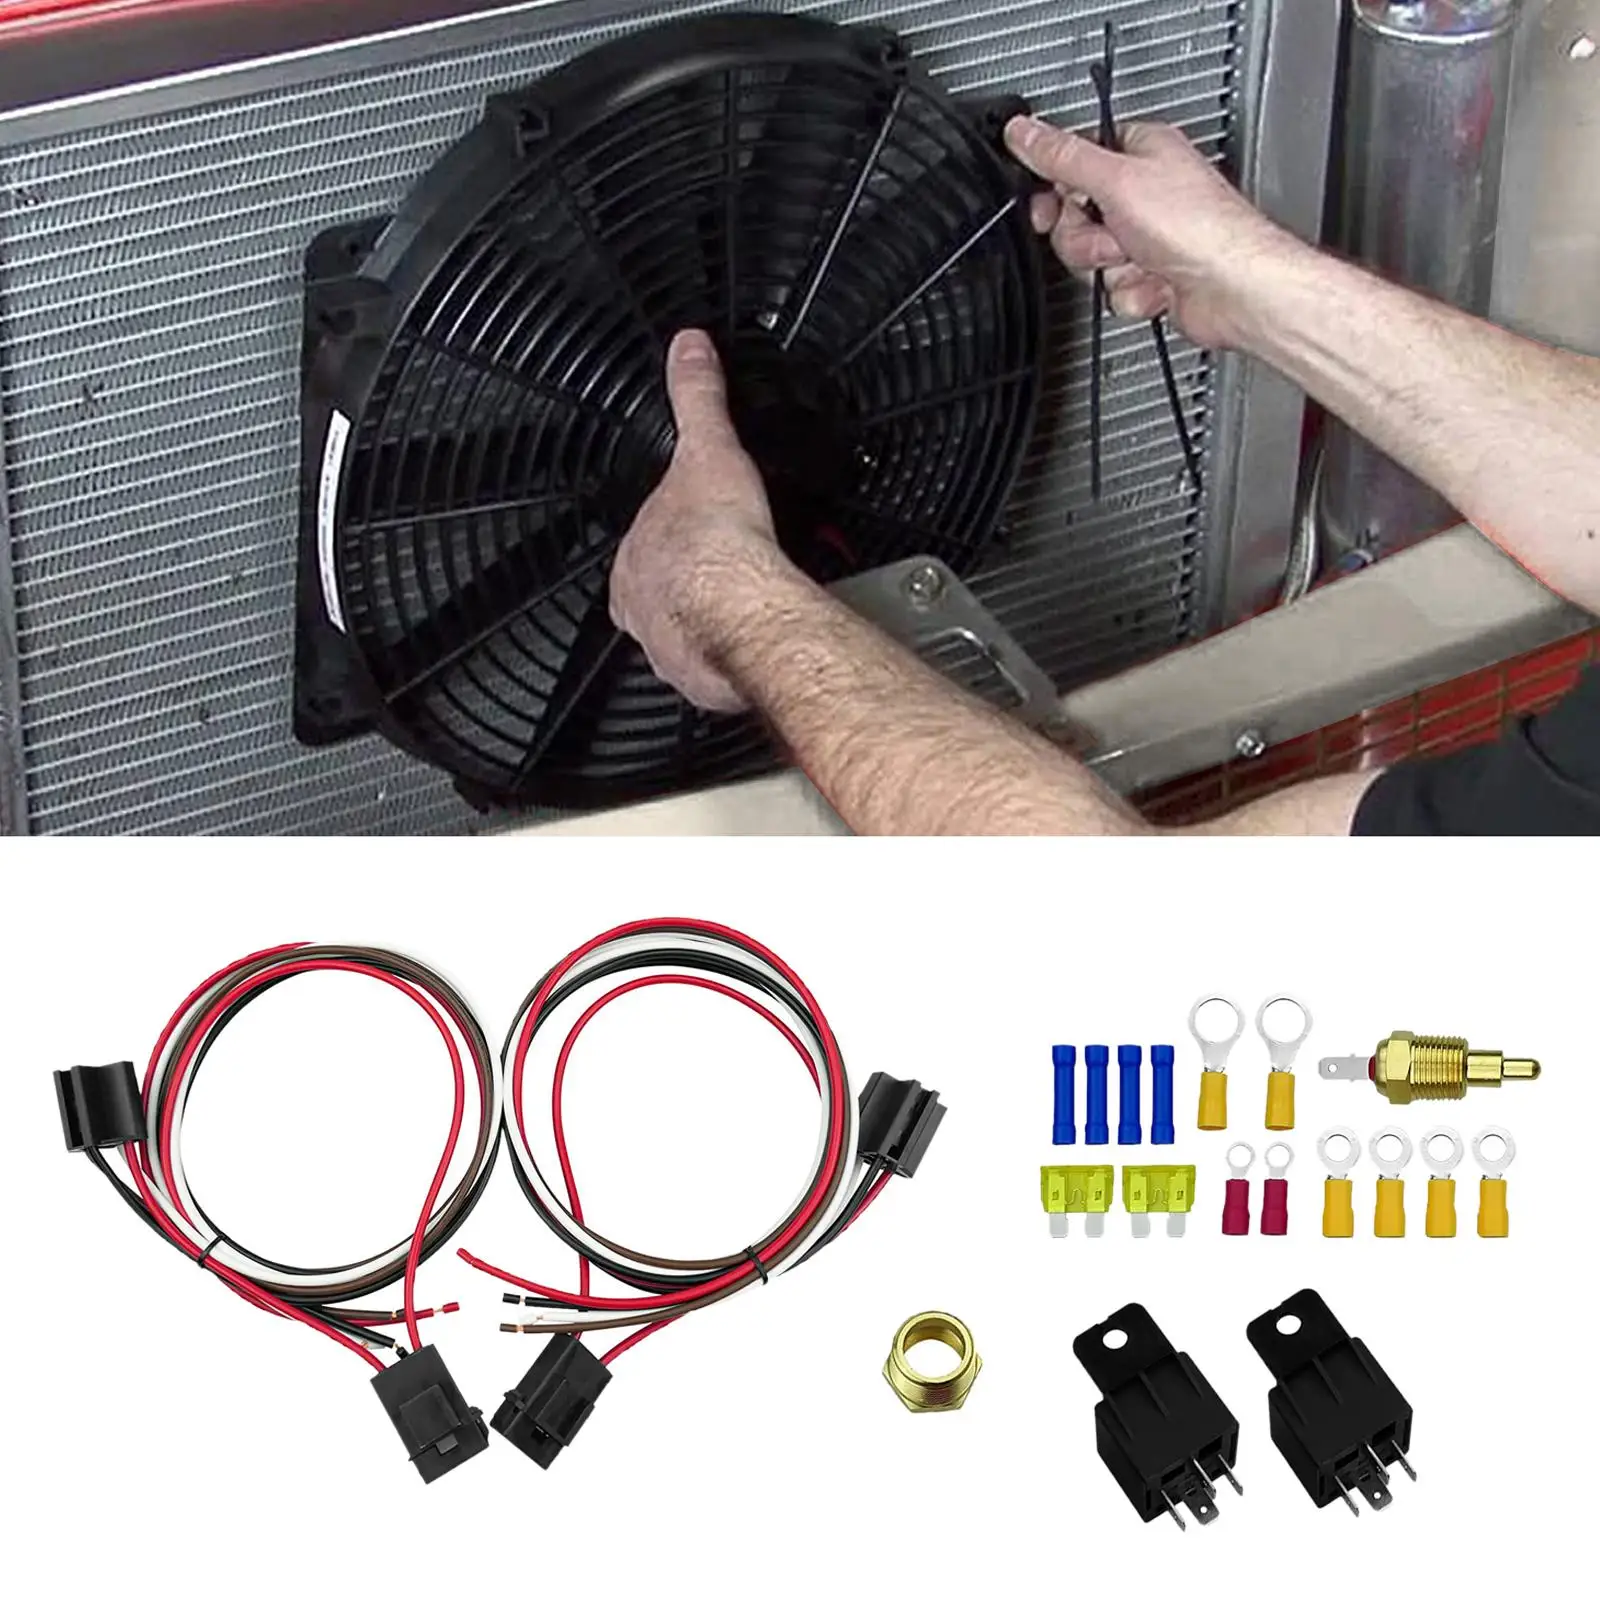 Automotive Electric Fan Wiring 185 On 175 Off 40 Amp Thermostat Electric Fan Wiring